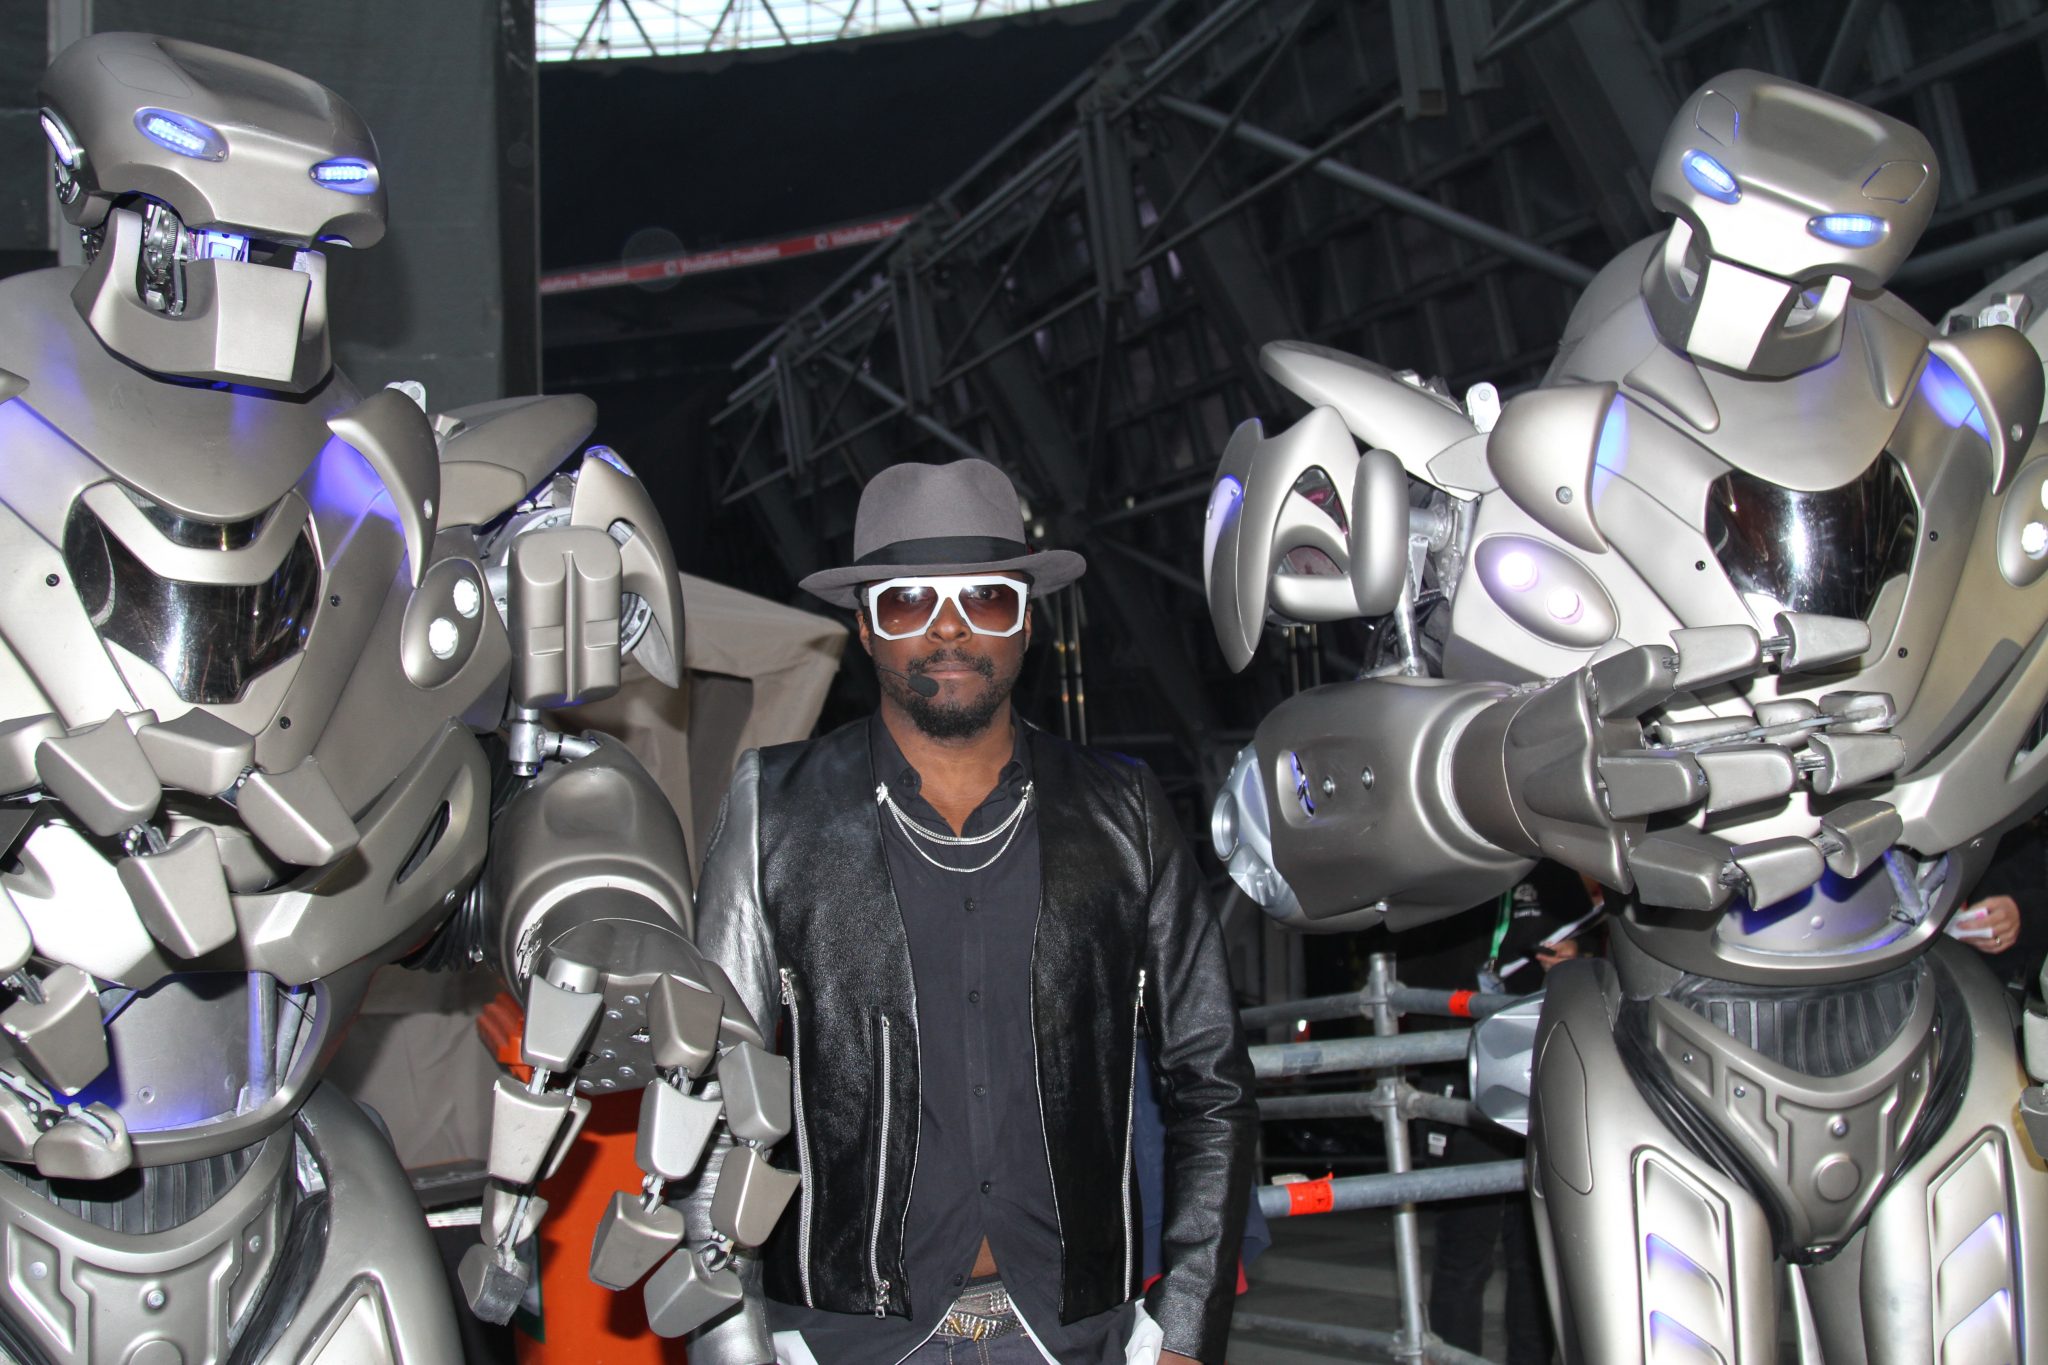 Will.i.am and Titan the Robot back stage at Wembley Stadium Capital FM Summertime Ball.